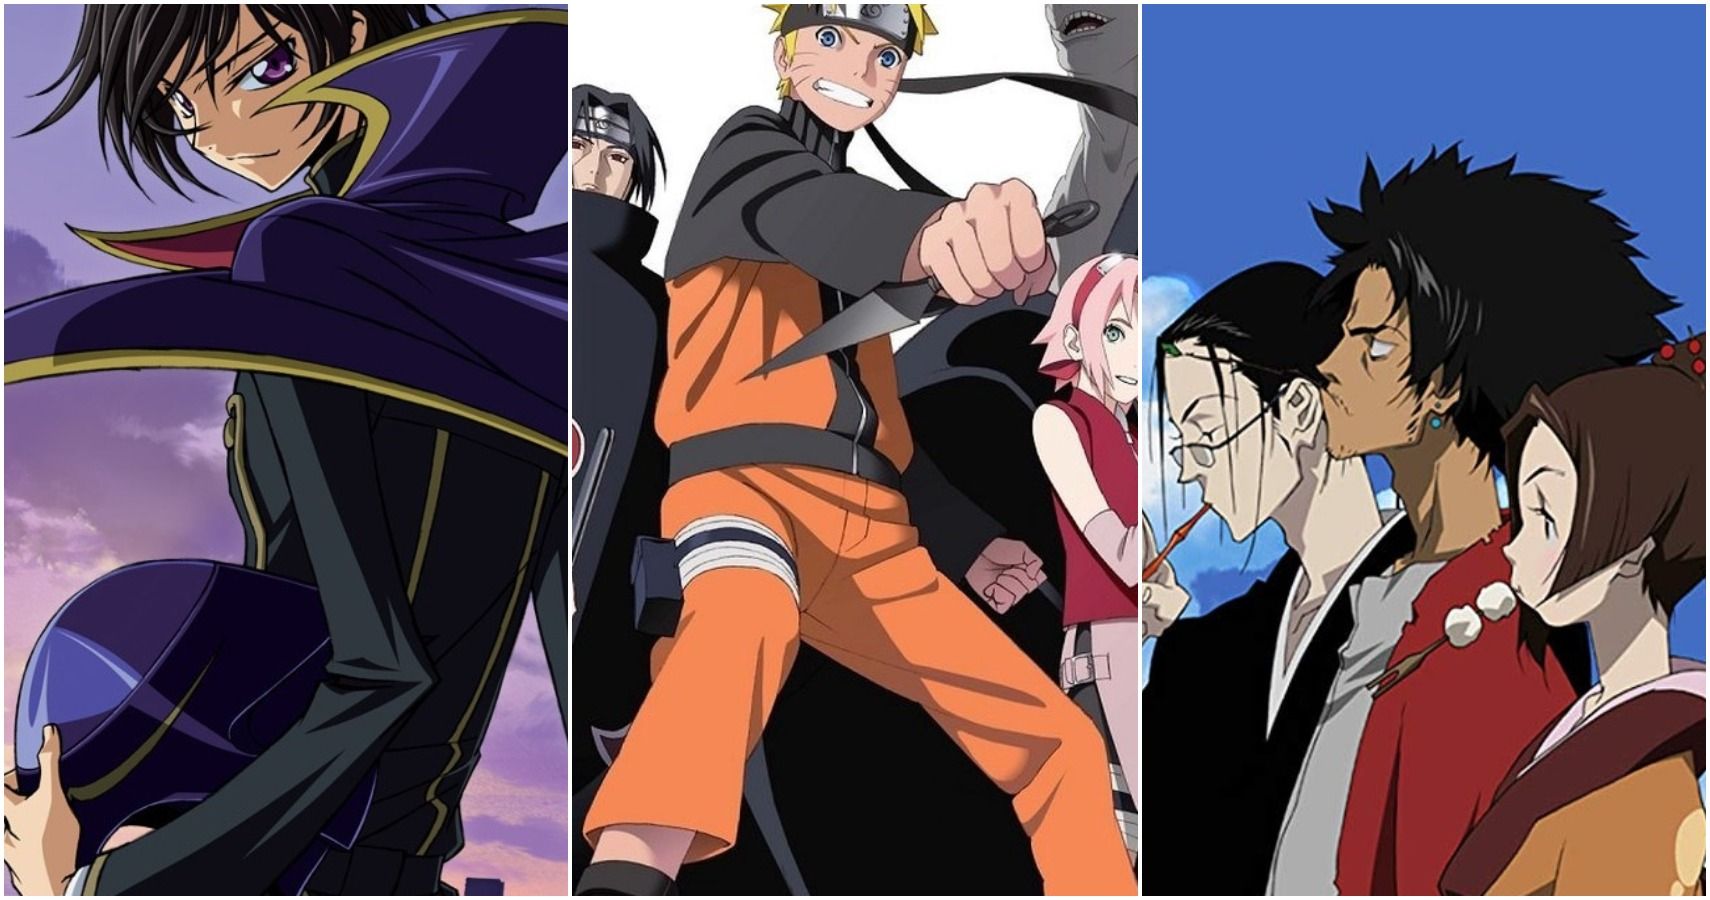 The 10 Highest Rated Anime Finales, According To IMDb